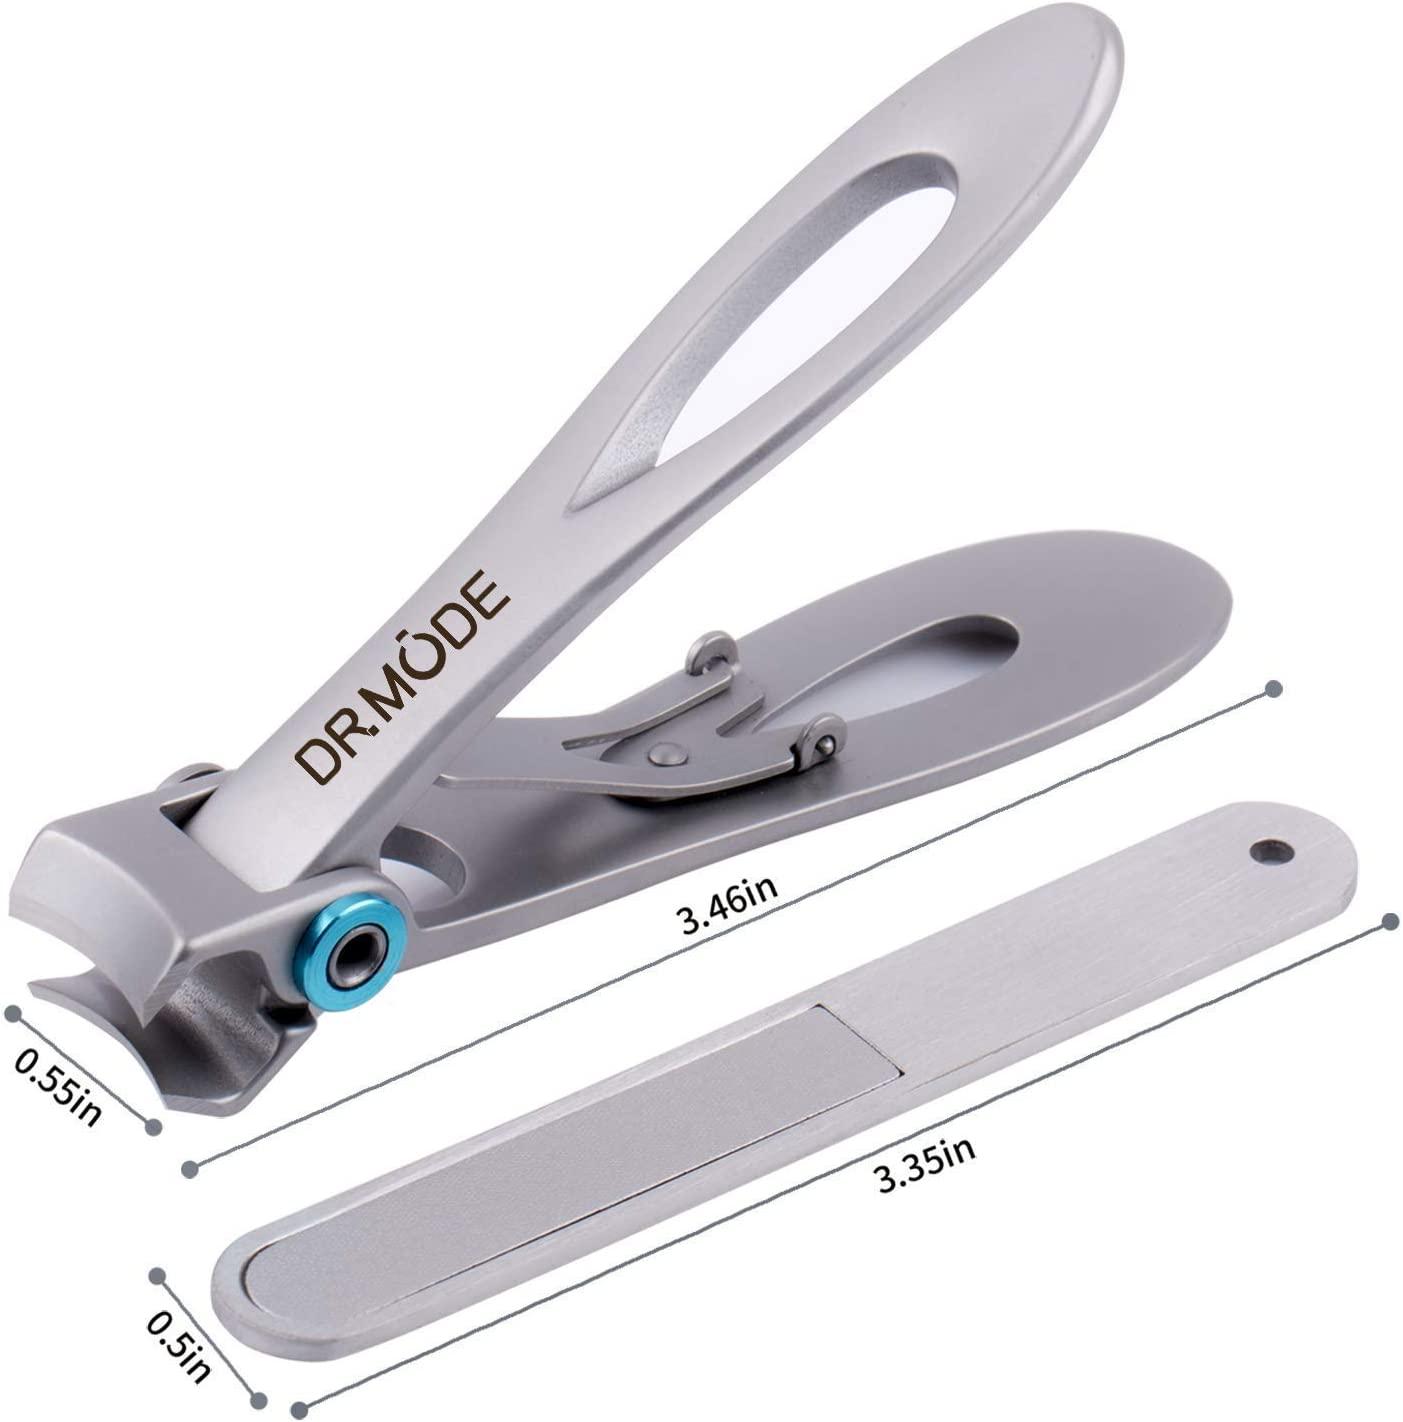 Nail Clippers for Thick Nails - DR. MODE 15mm Wide Jaw Opening Extra Large Toenail  Clippers Cutter with Nail File for Thick Nails, Heavy Duty Fingernail  Clippers for Men, Seniors